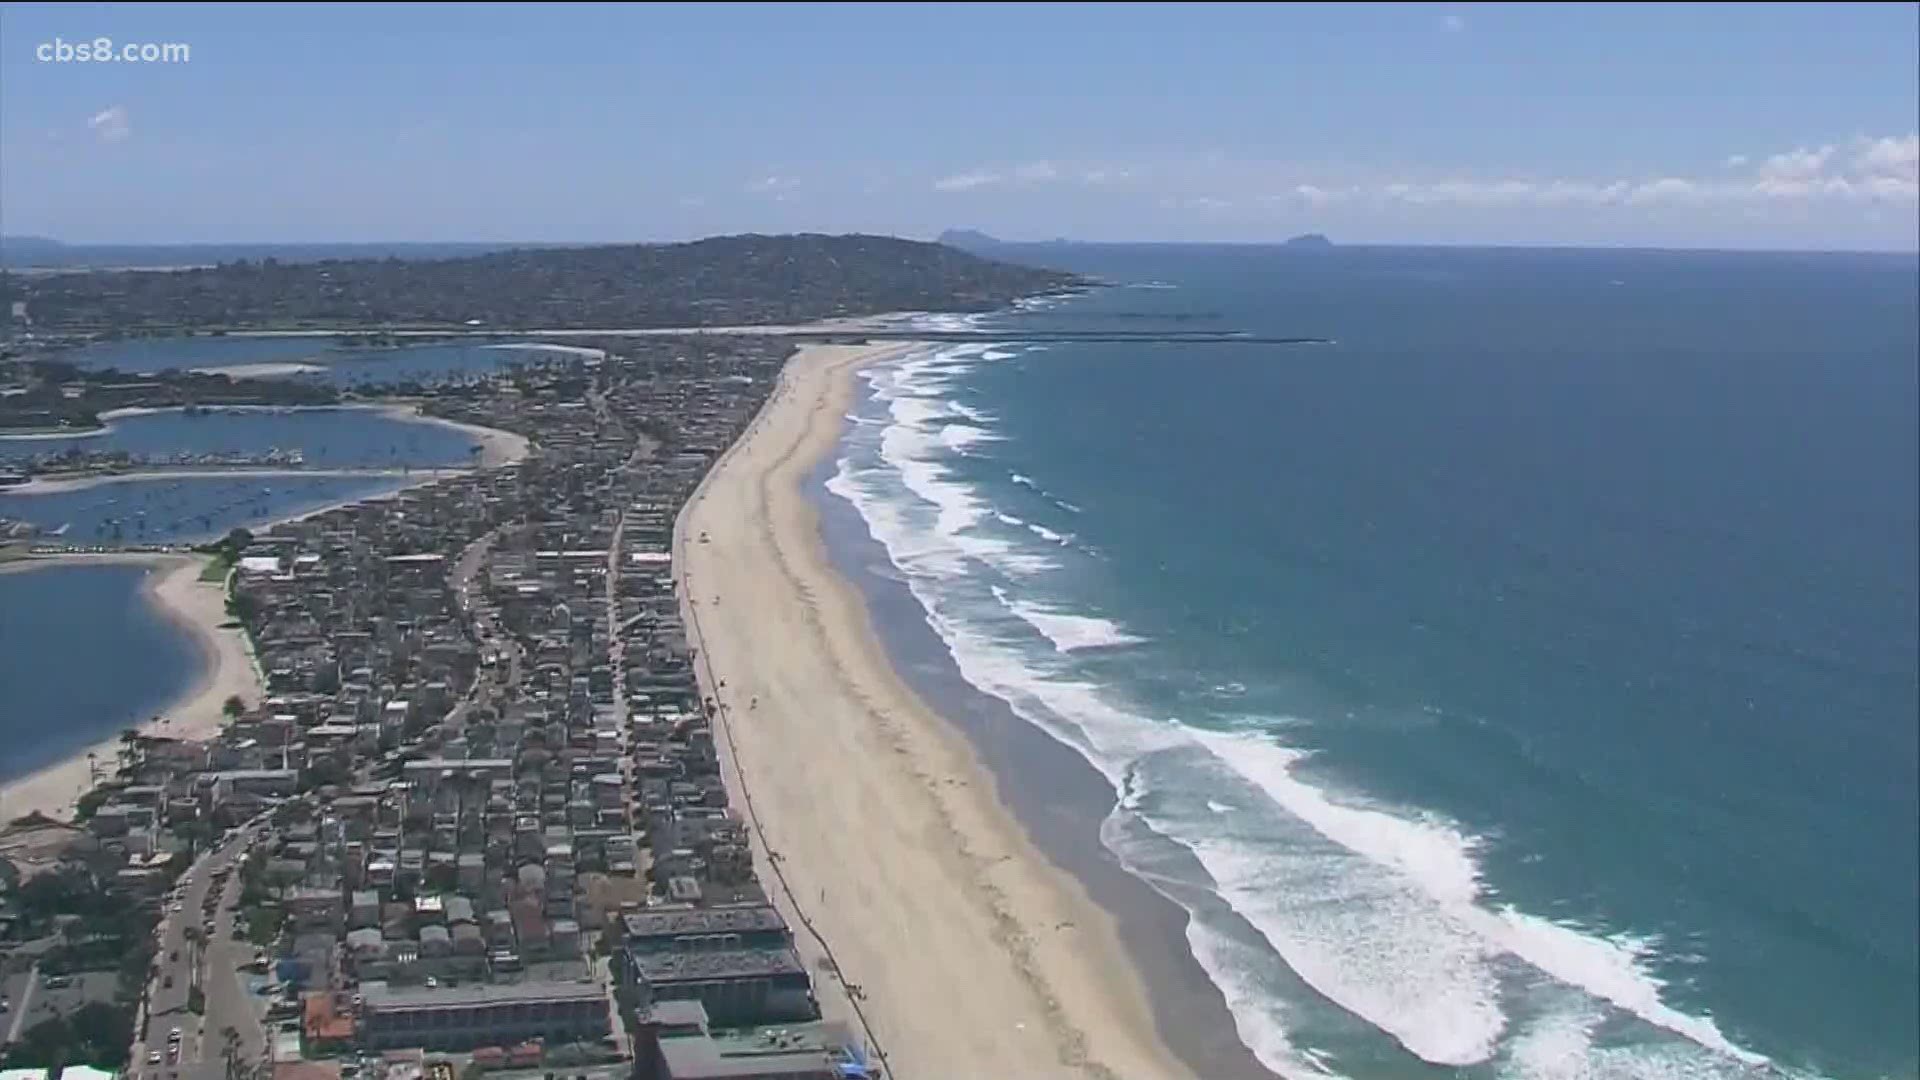 Officials in the beach cities of Del Mar and Solana Beach say they will not reopen beaches on Monday.